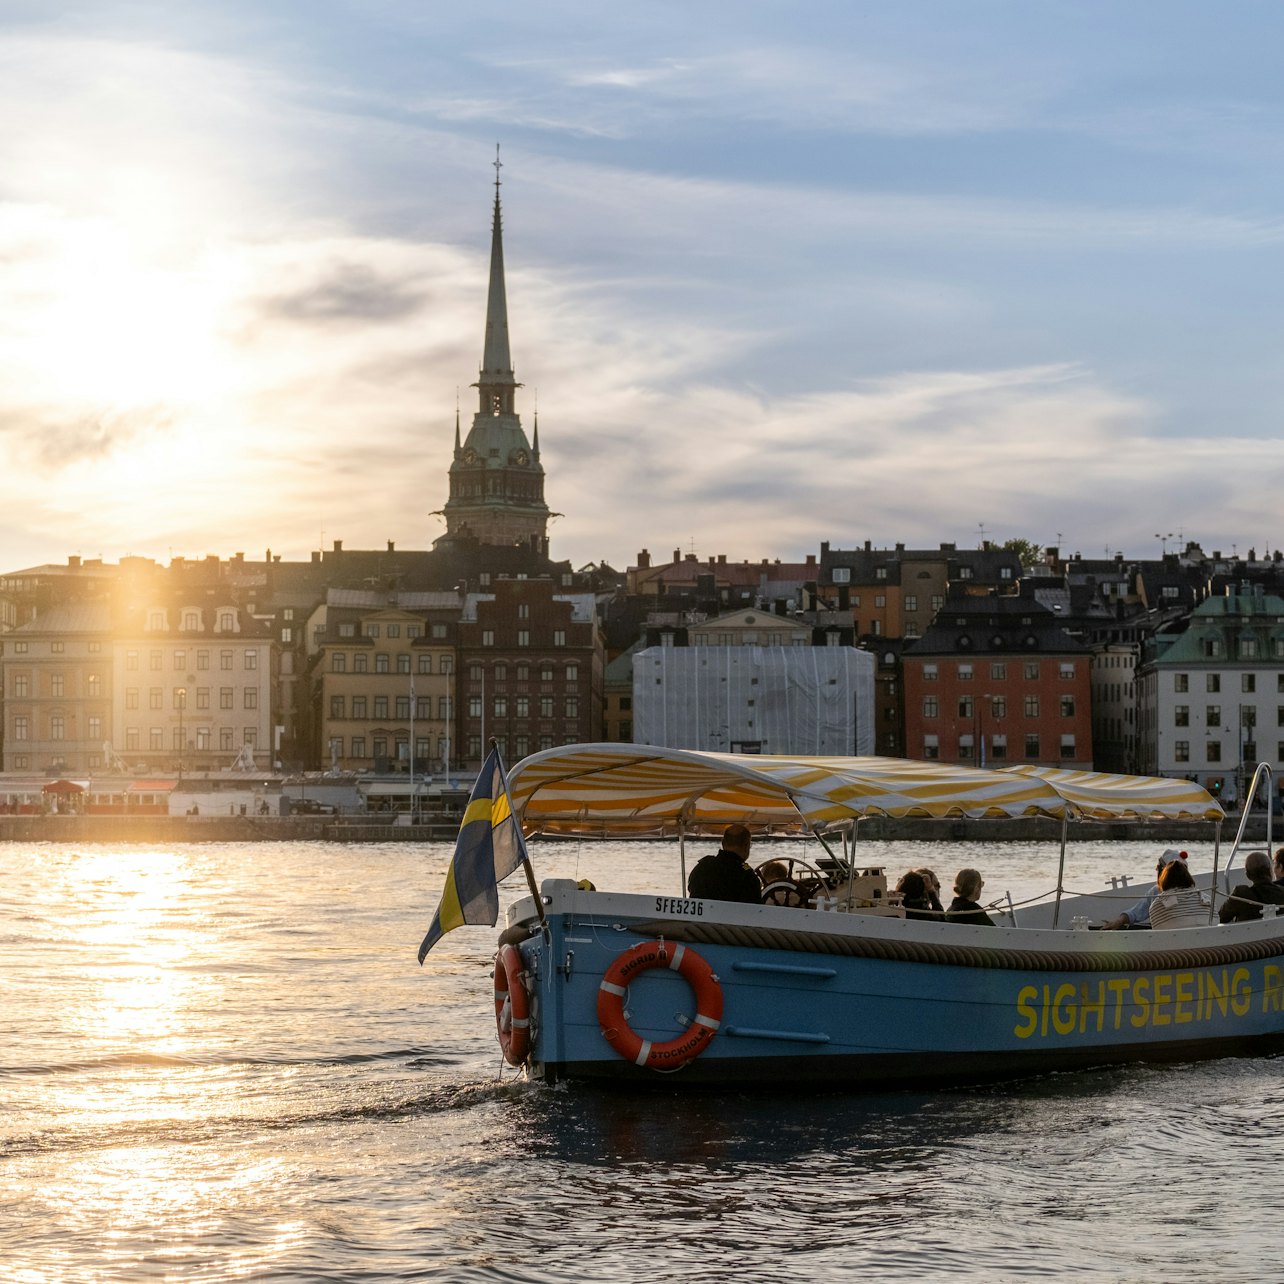 Stockholm Guided Sightseeing Boat Tour with Live Guide - Accommodations in Stockholm